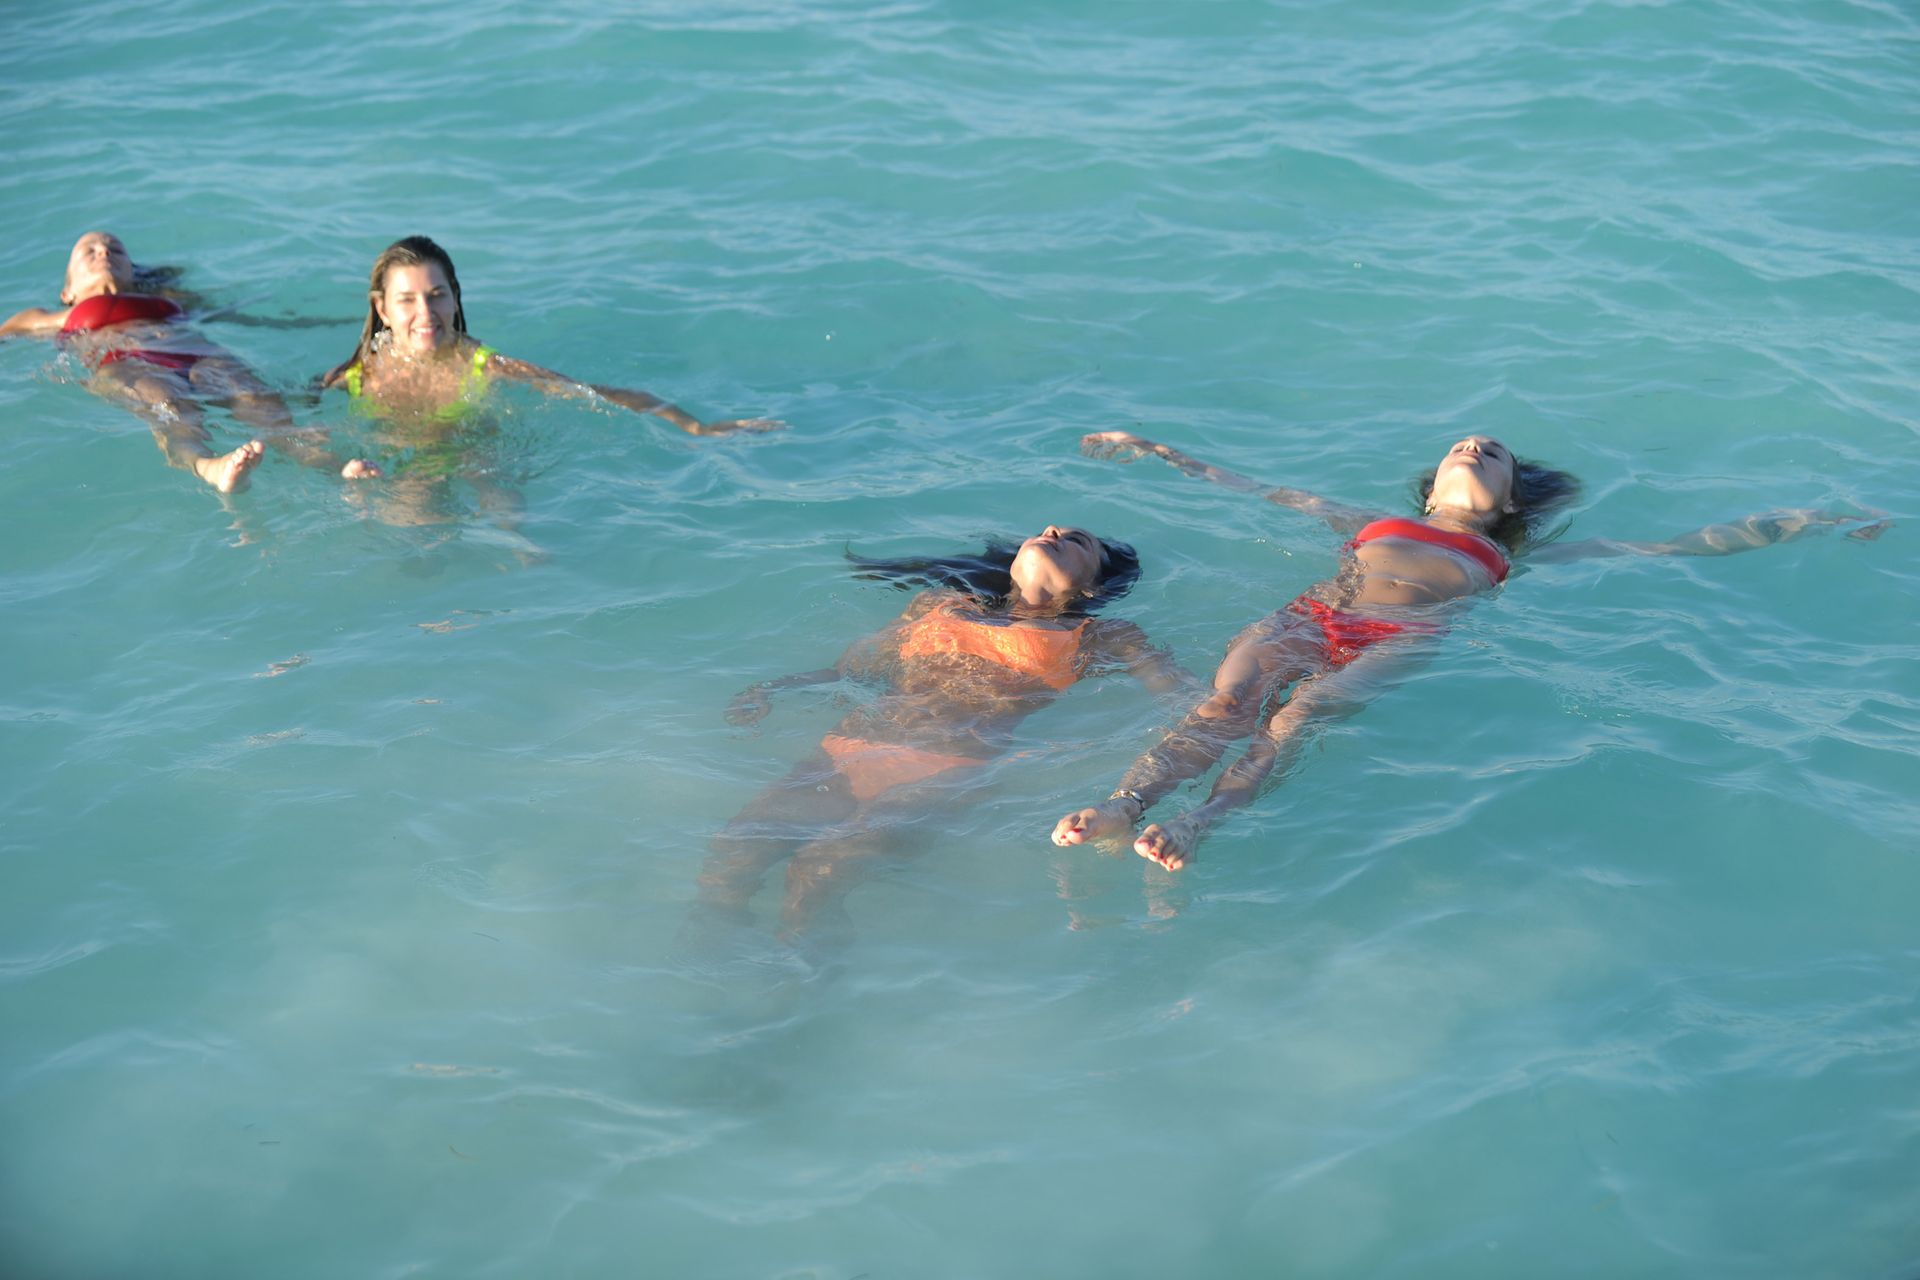 Brooke Burke and her Girlfriends are Having fun During a Boat Trip (143 Photos)